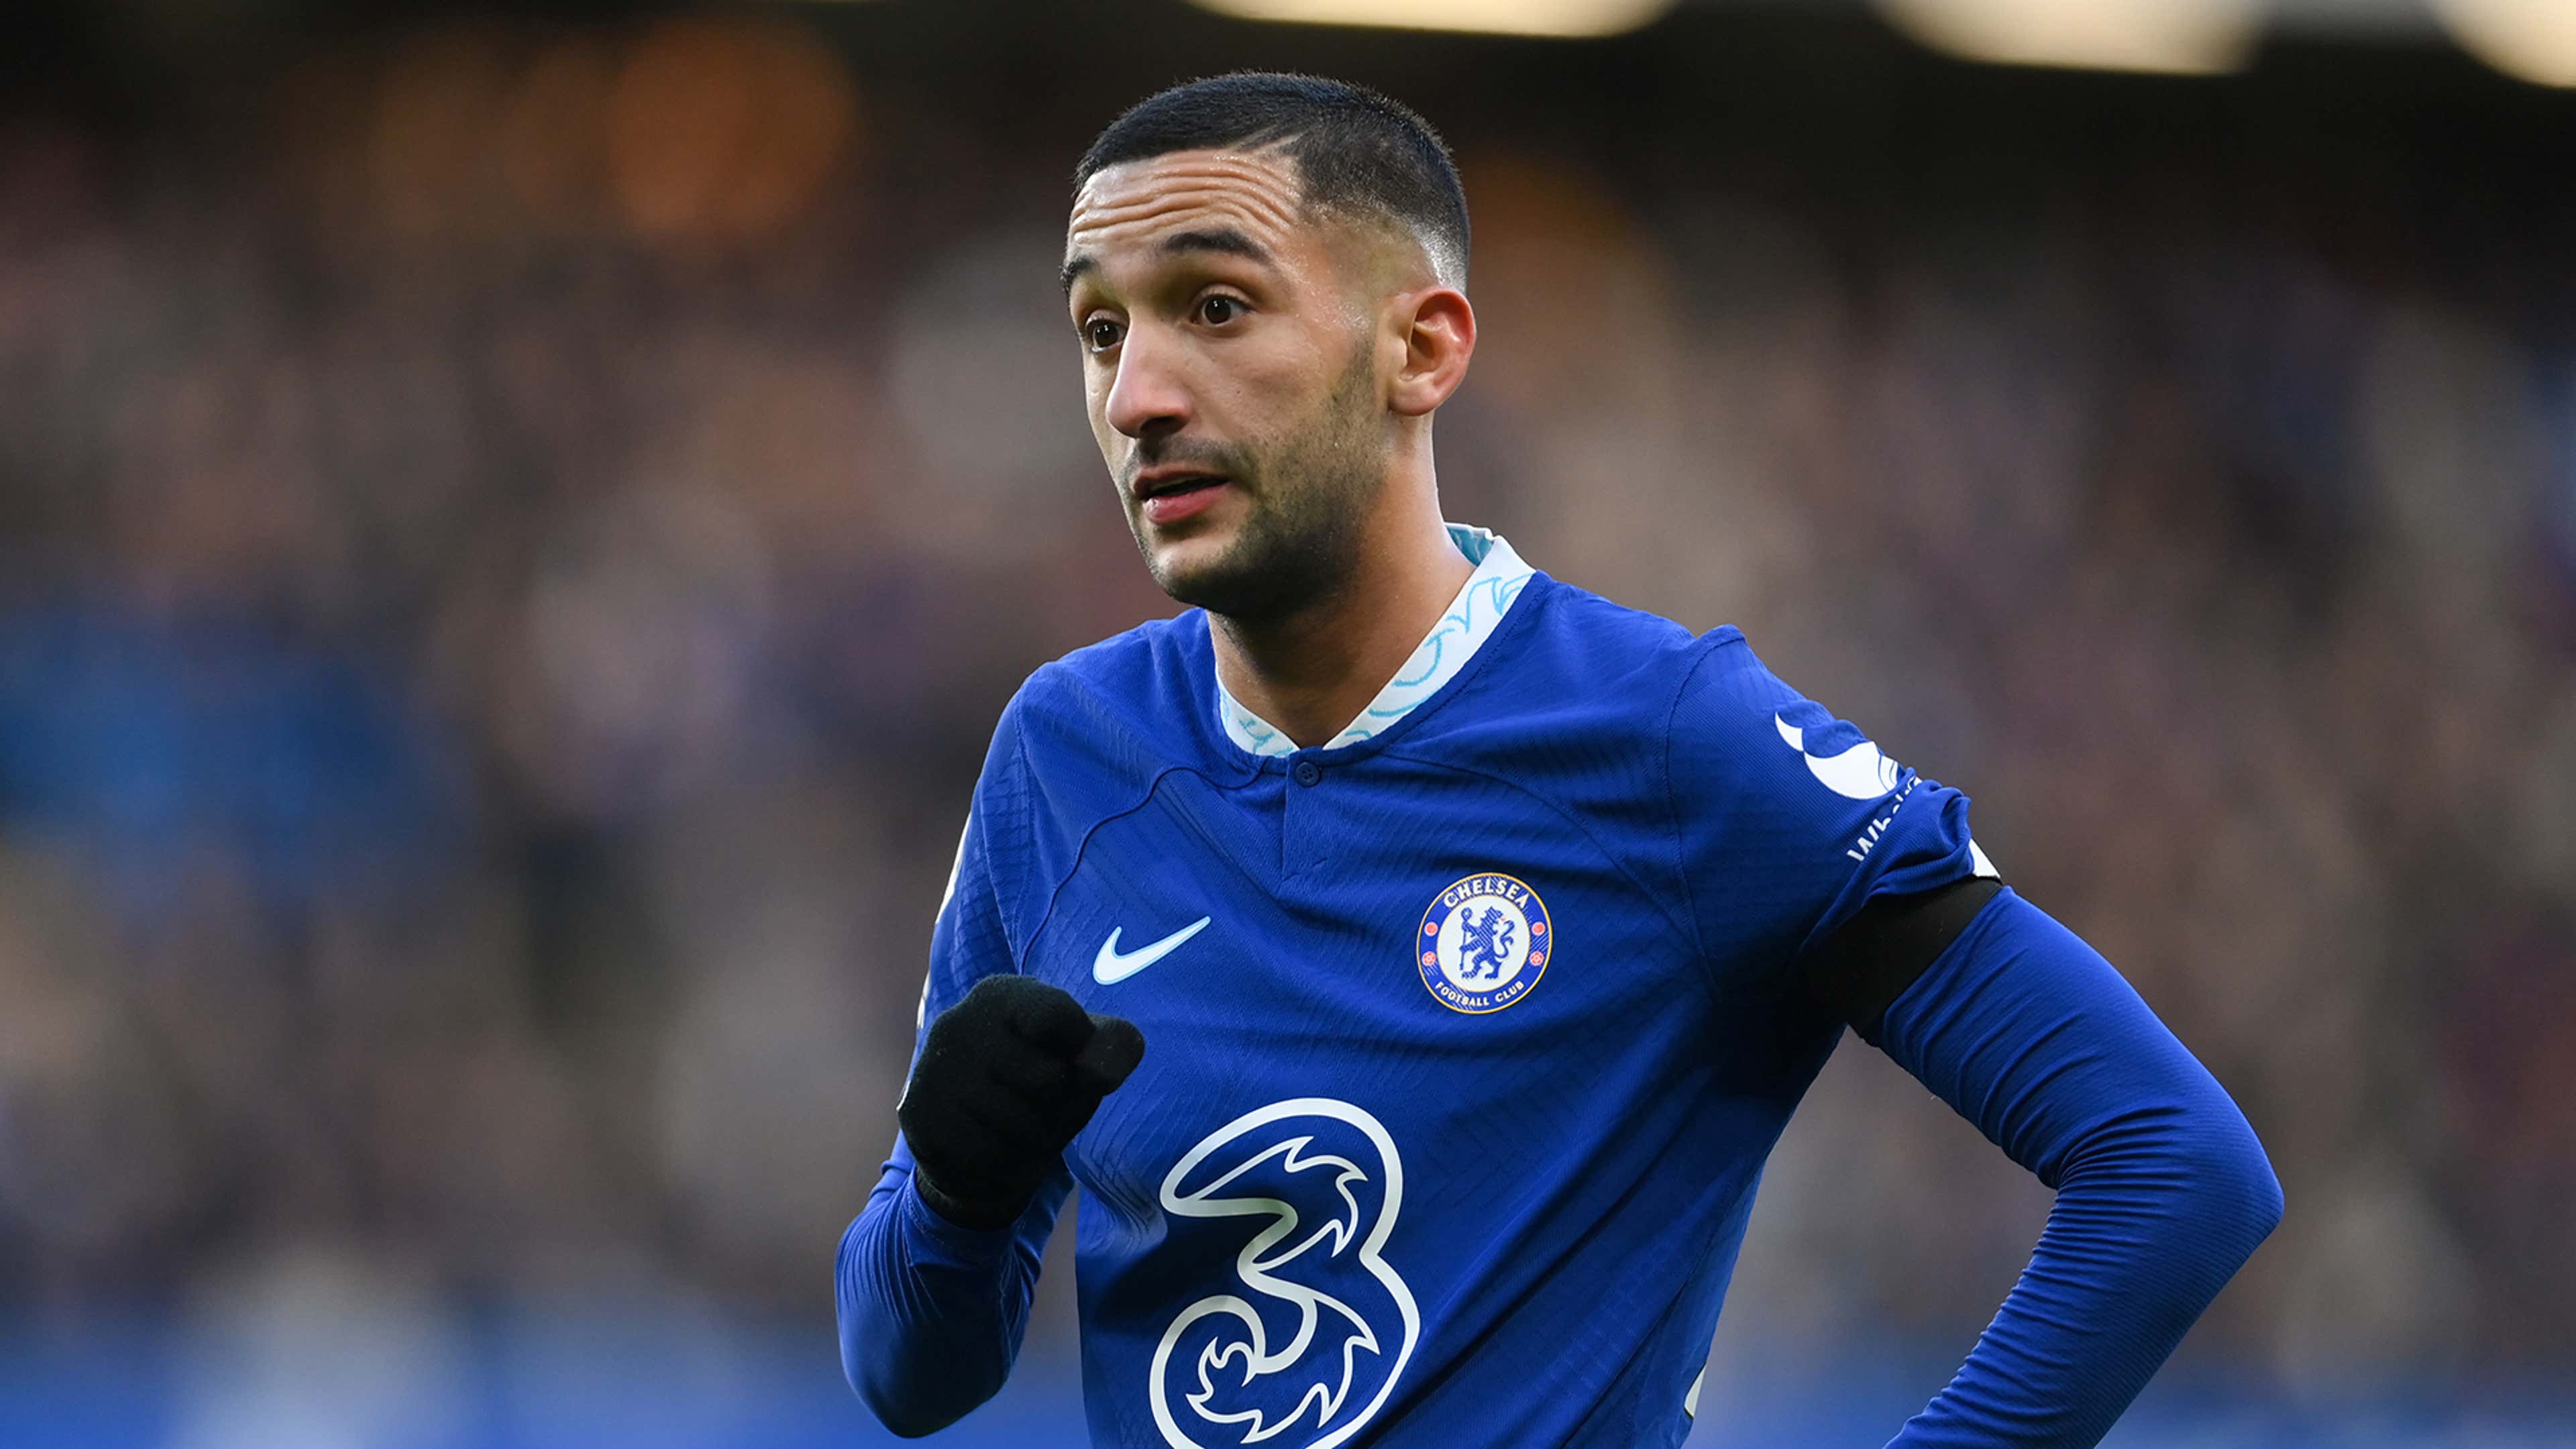 Hakim Ziyech may be the next Chelsea player to leave for Saudi Arabia.